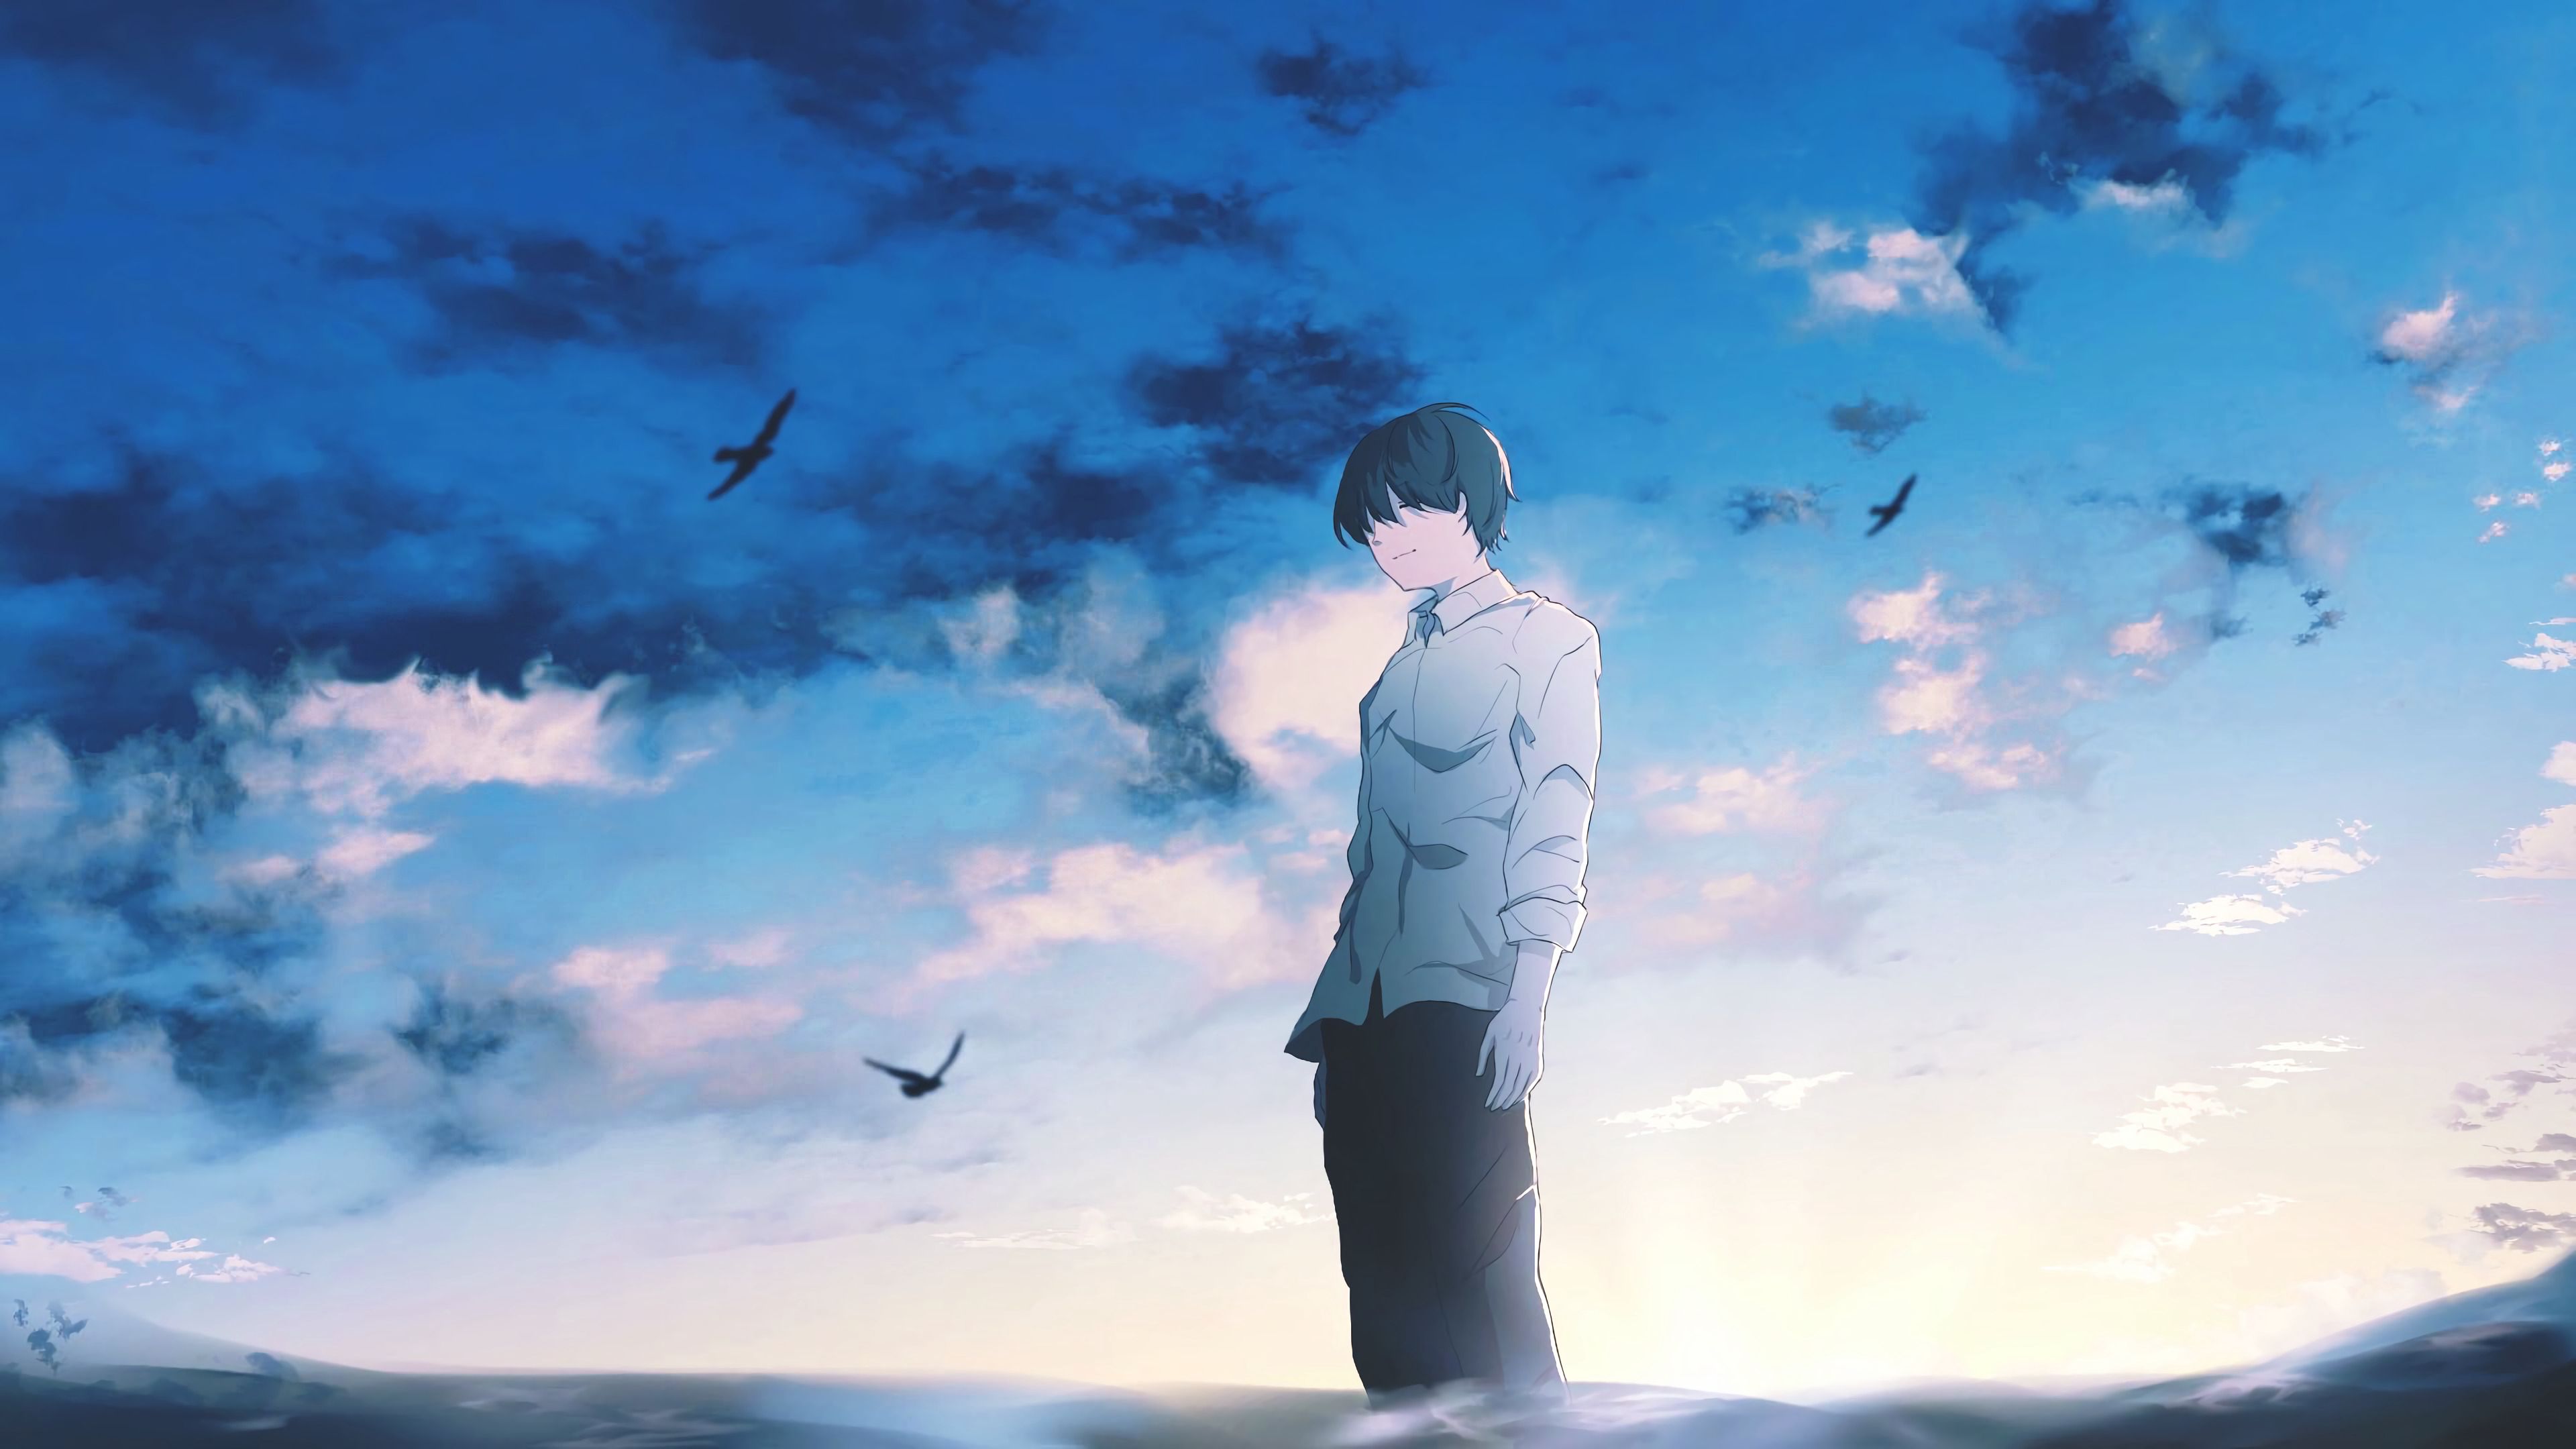 Download wallpaper 3840x2160 guy, alone, sad, water, anime hd background